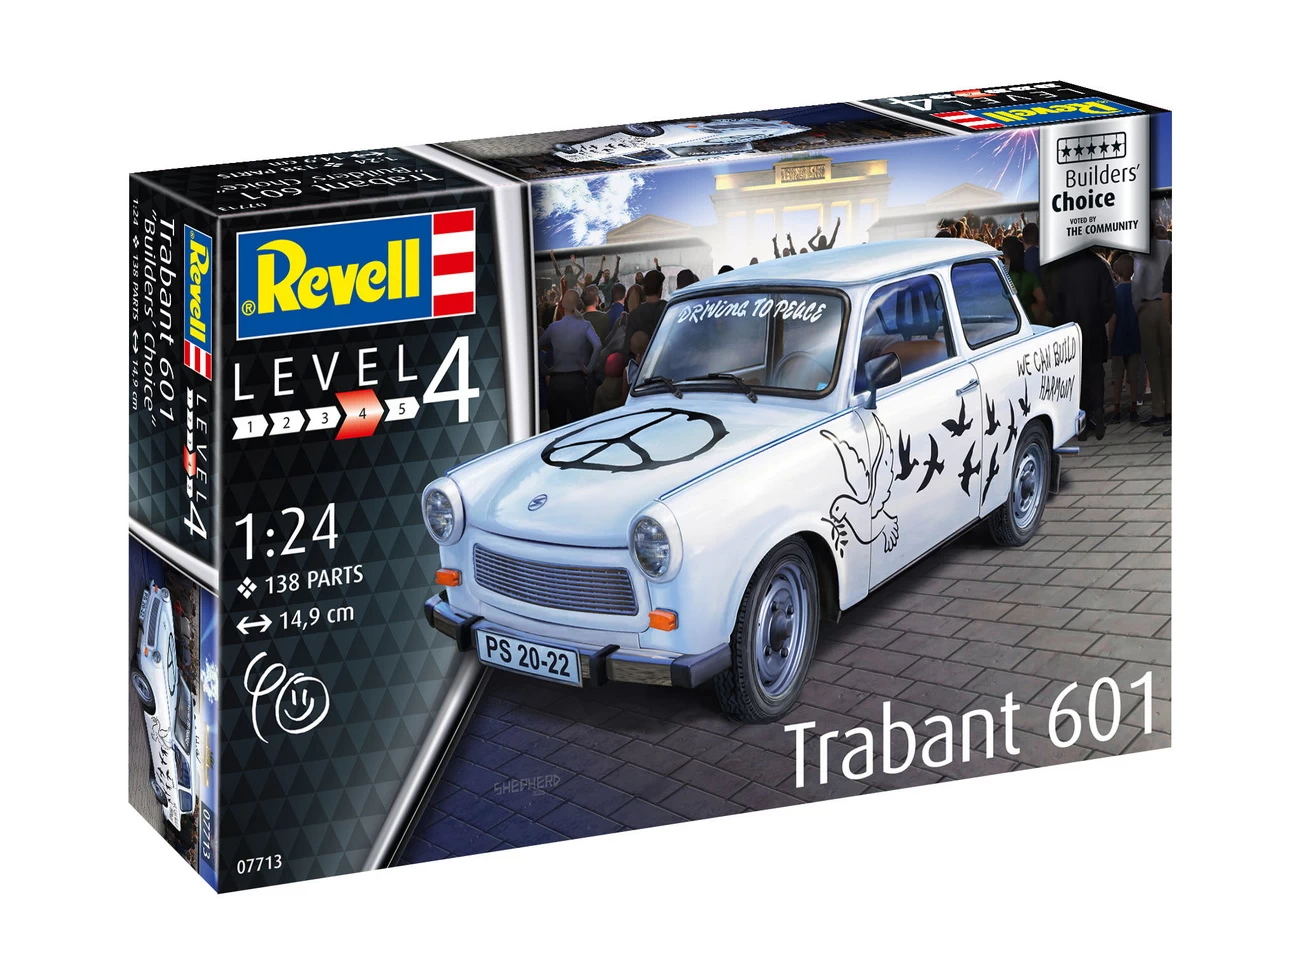 Revell 07713 - Trabant 601S Builders Choice - Auto Modell